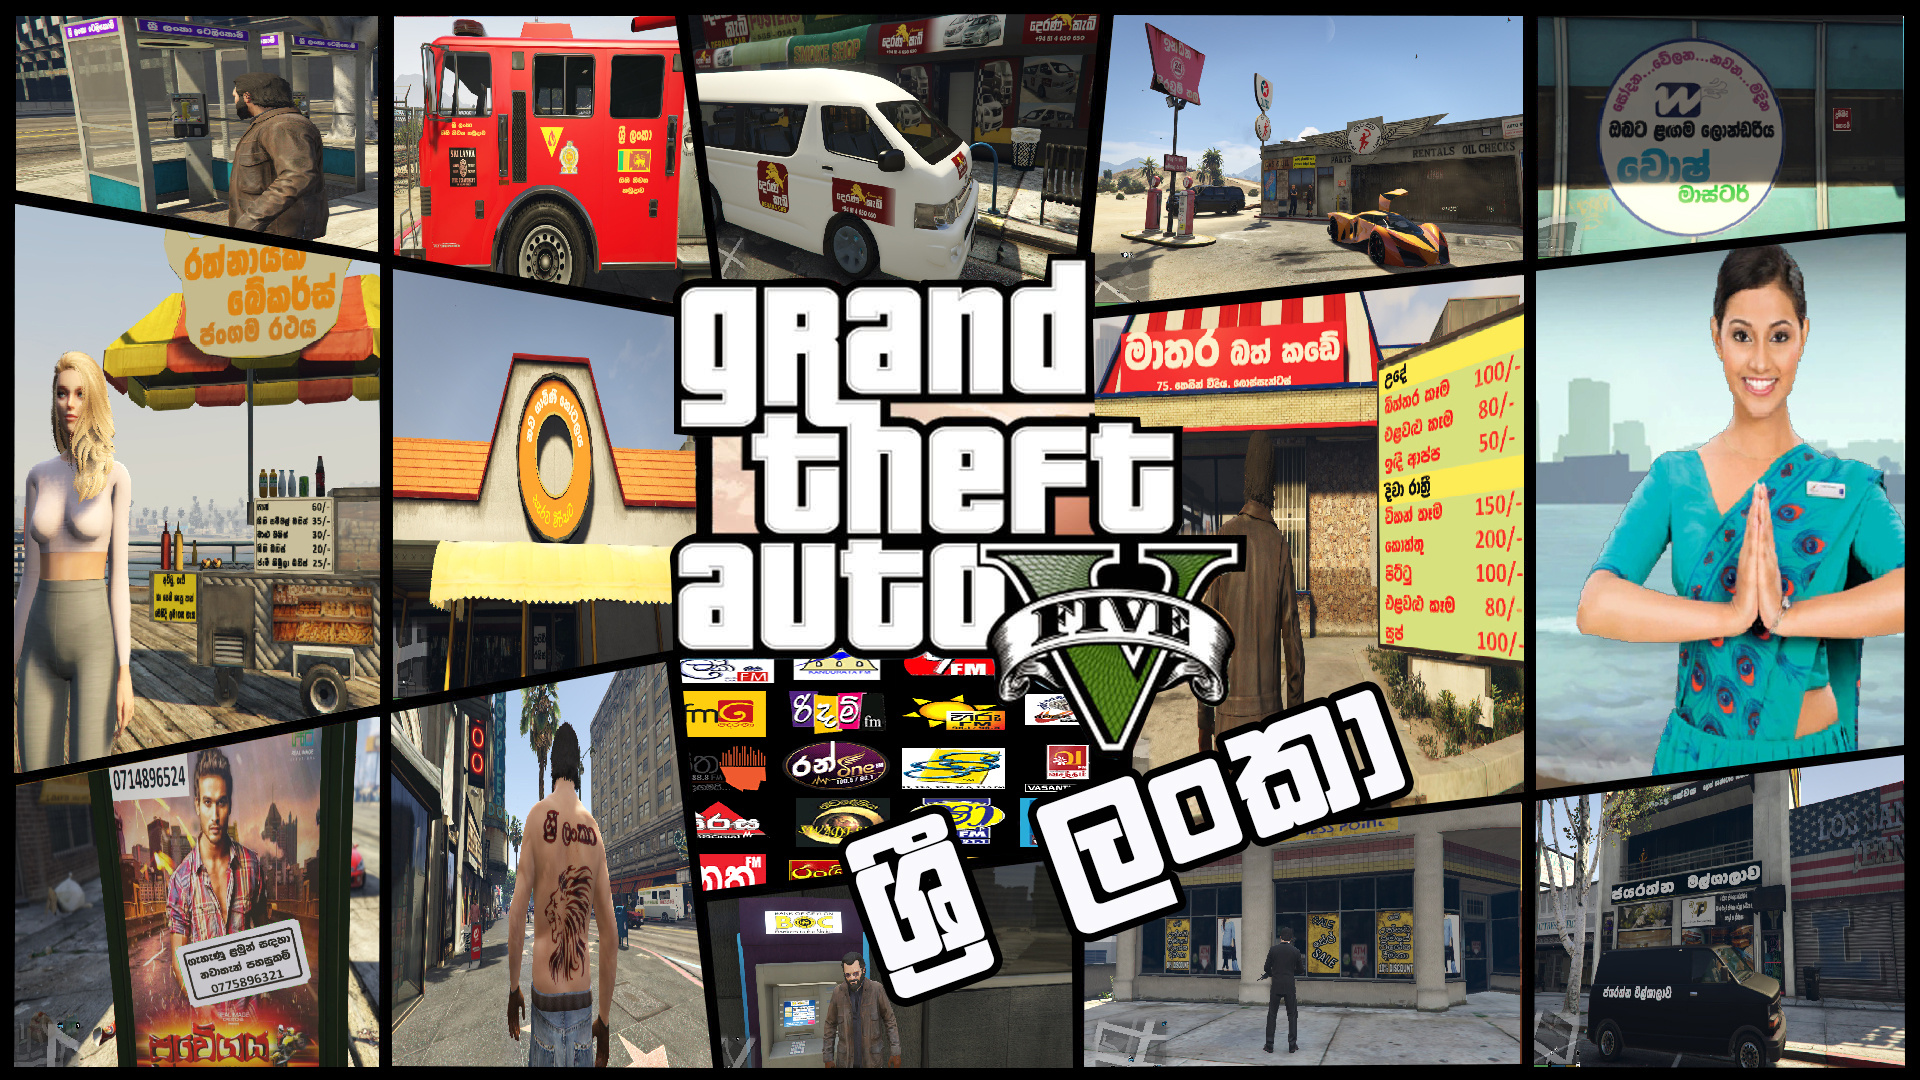 download the new Grand Theft Auto 5